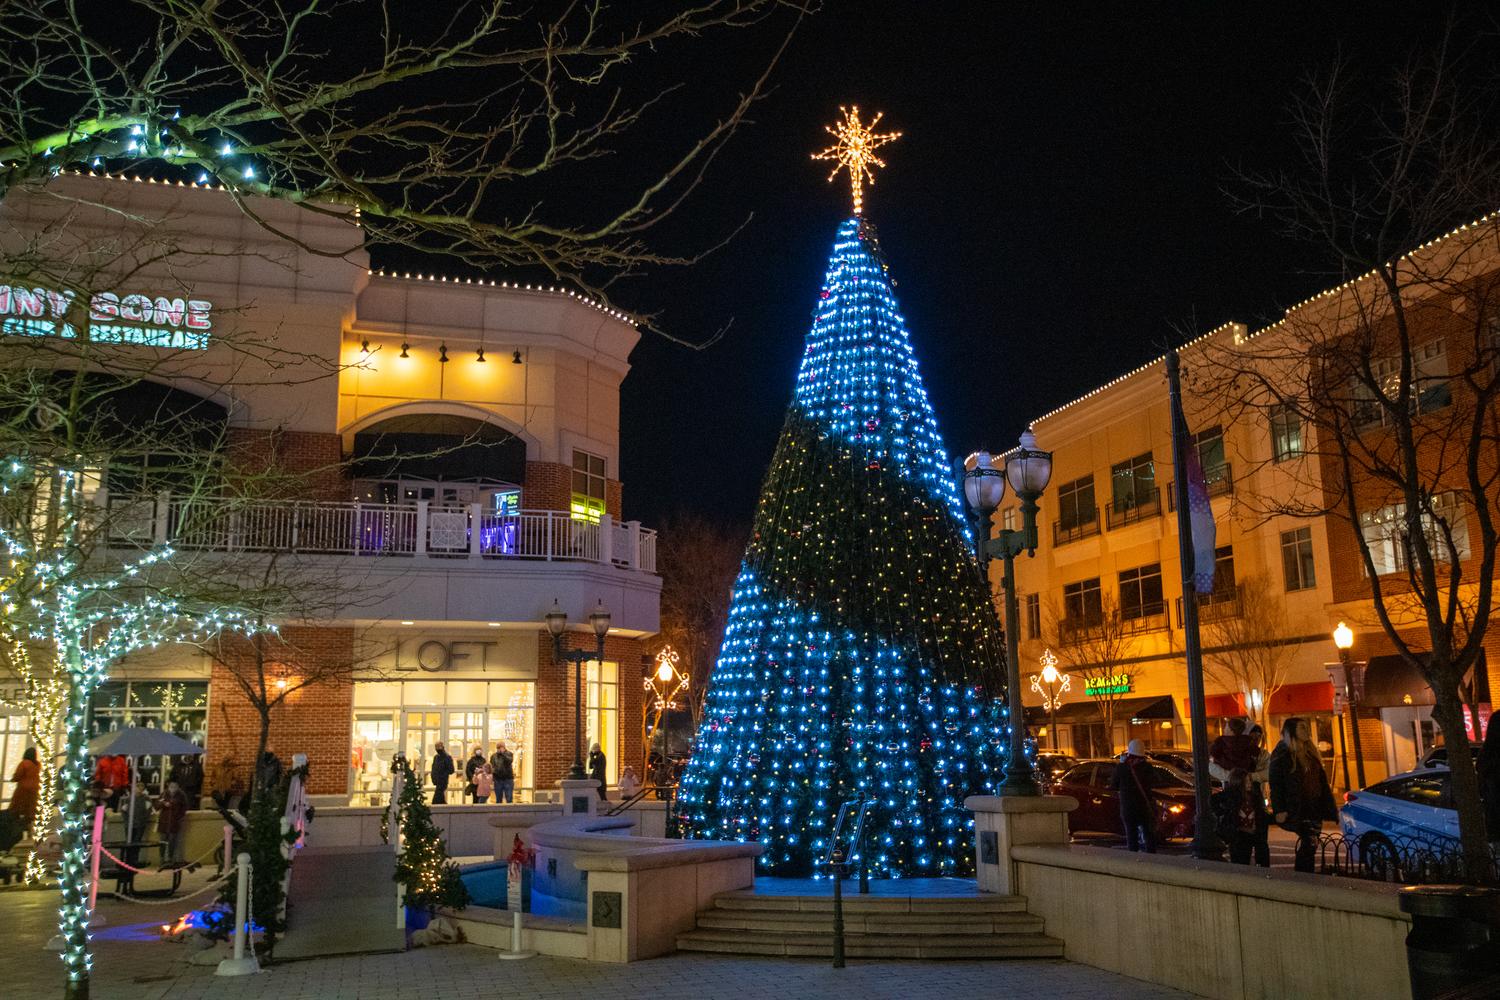 giant lit tree in outdoor shopping plaza